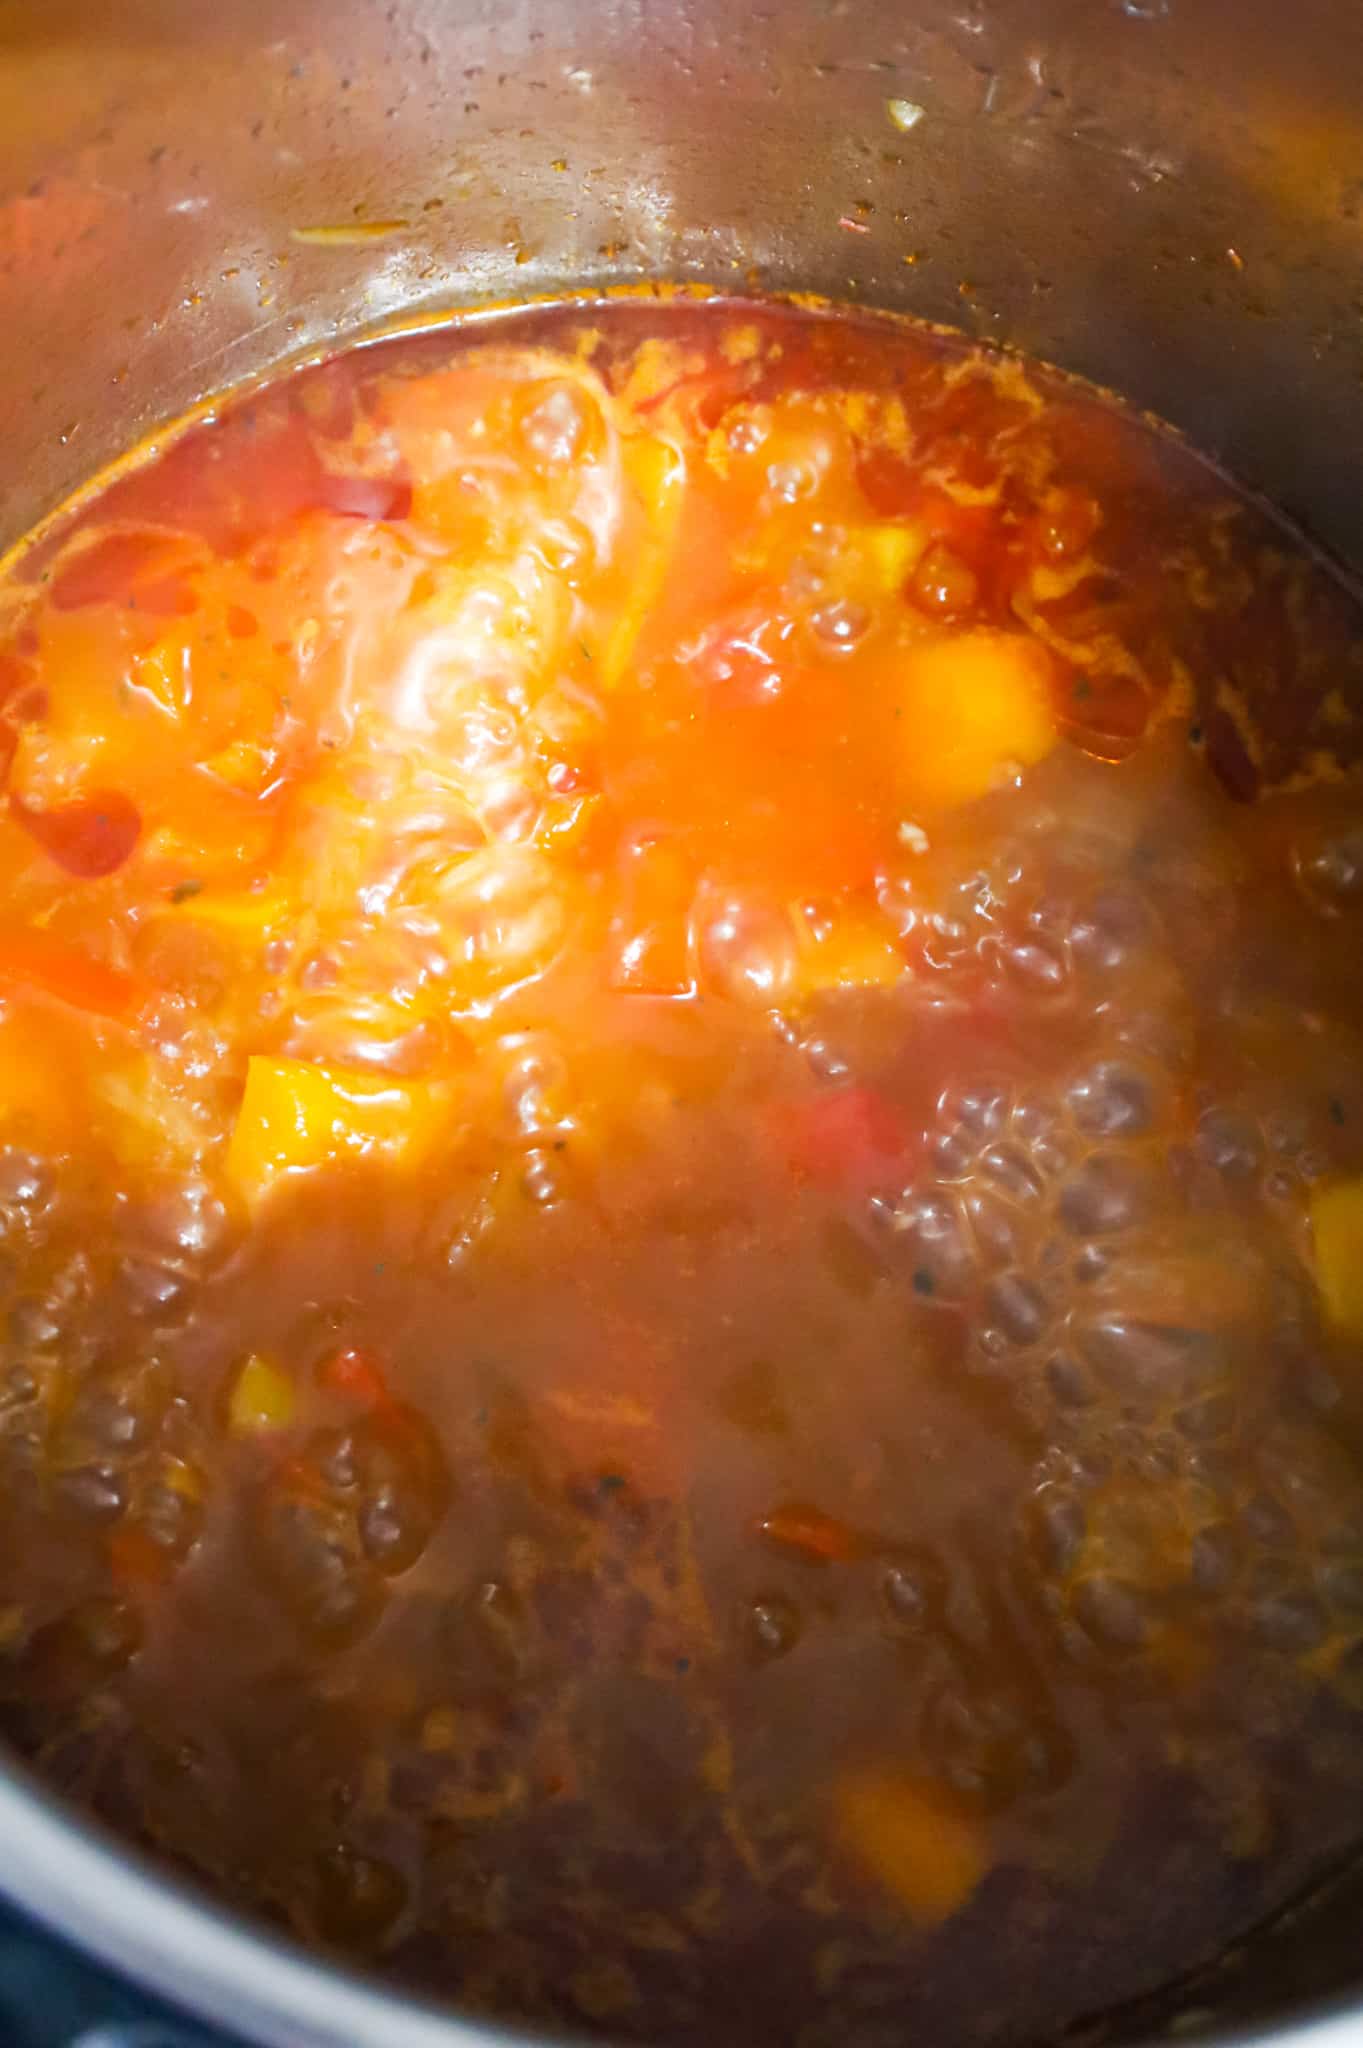 peppers and onions in tomato sauce mixture after pressure cooking